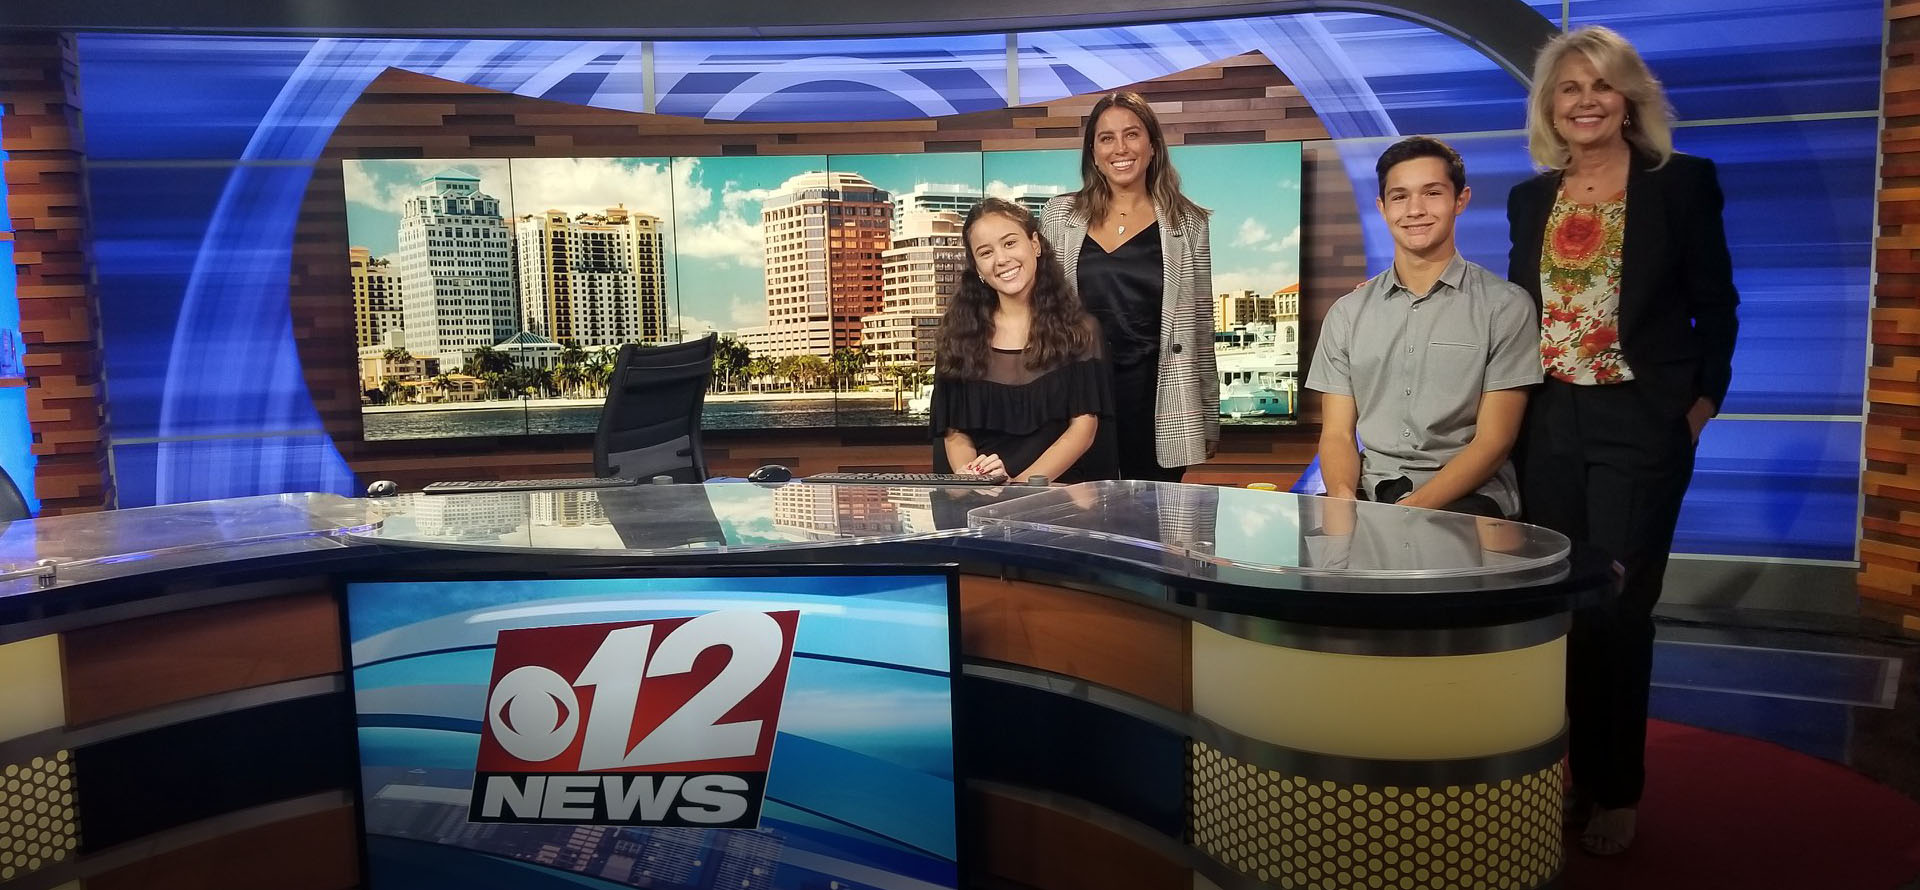 Participants of the Barb Schmidt Fellowship on set at CBS News Channel 12